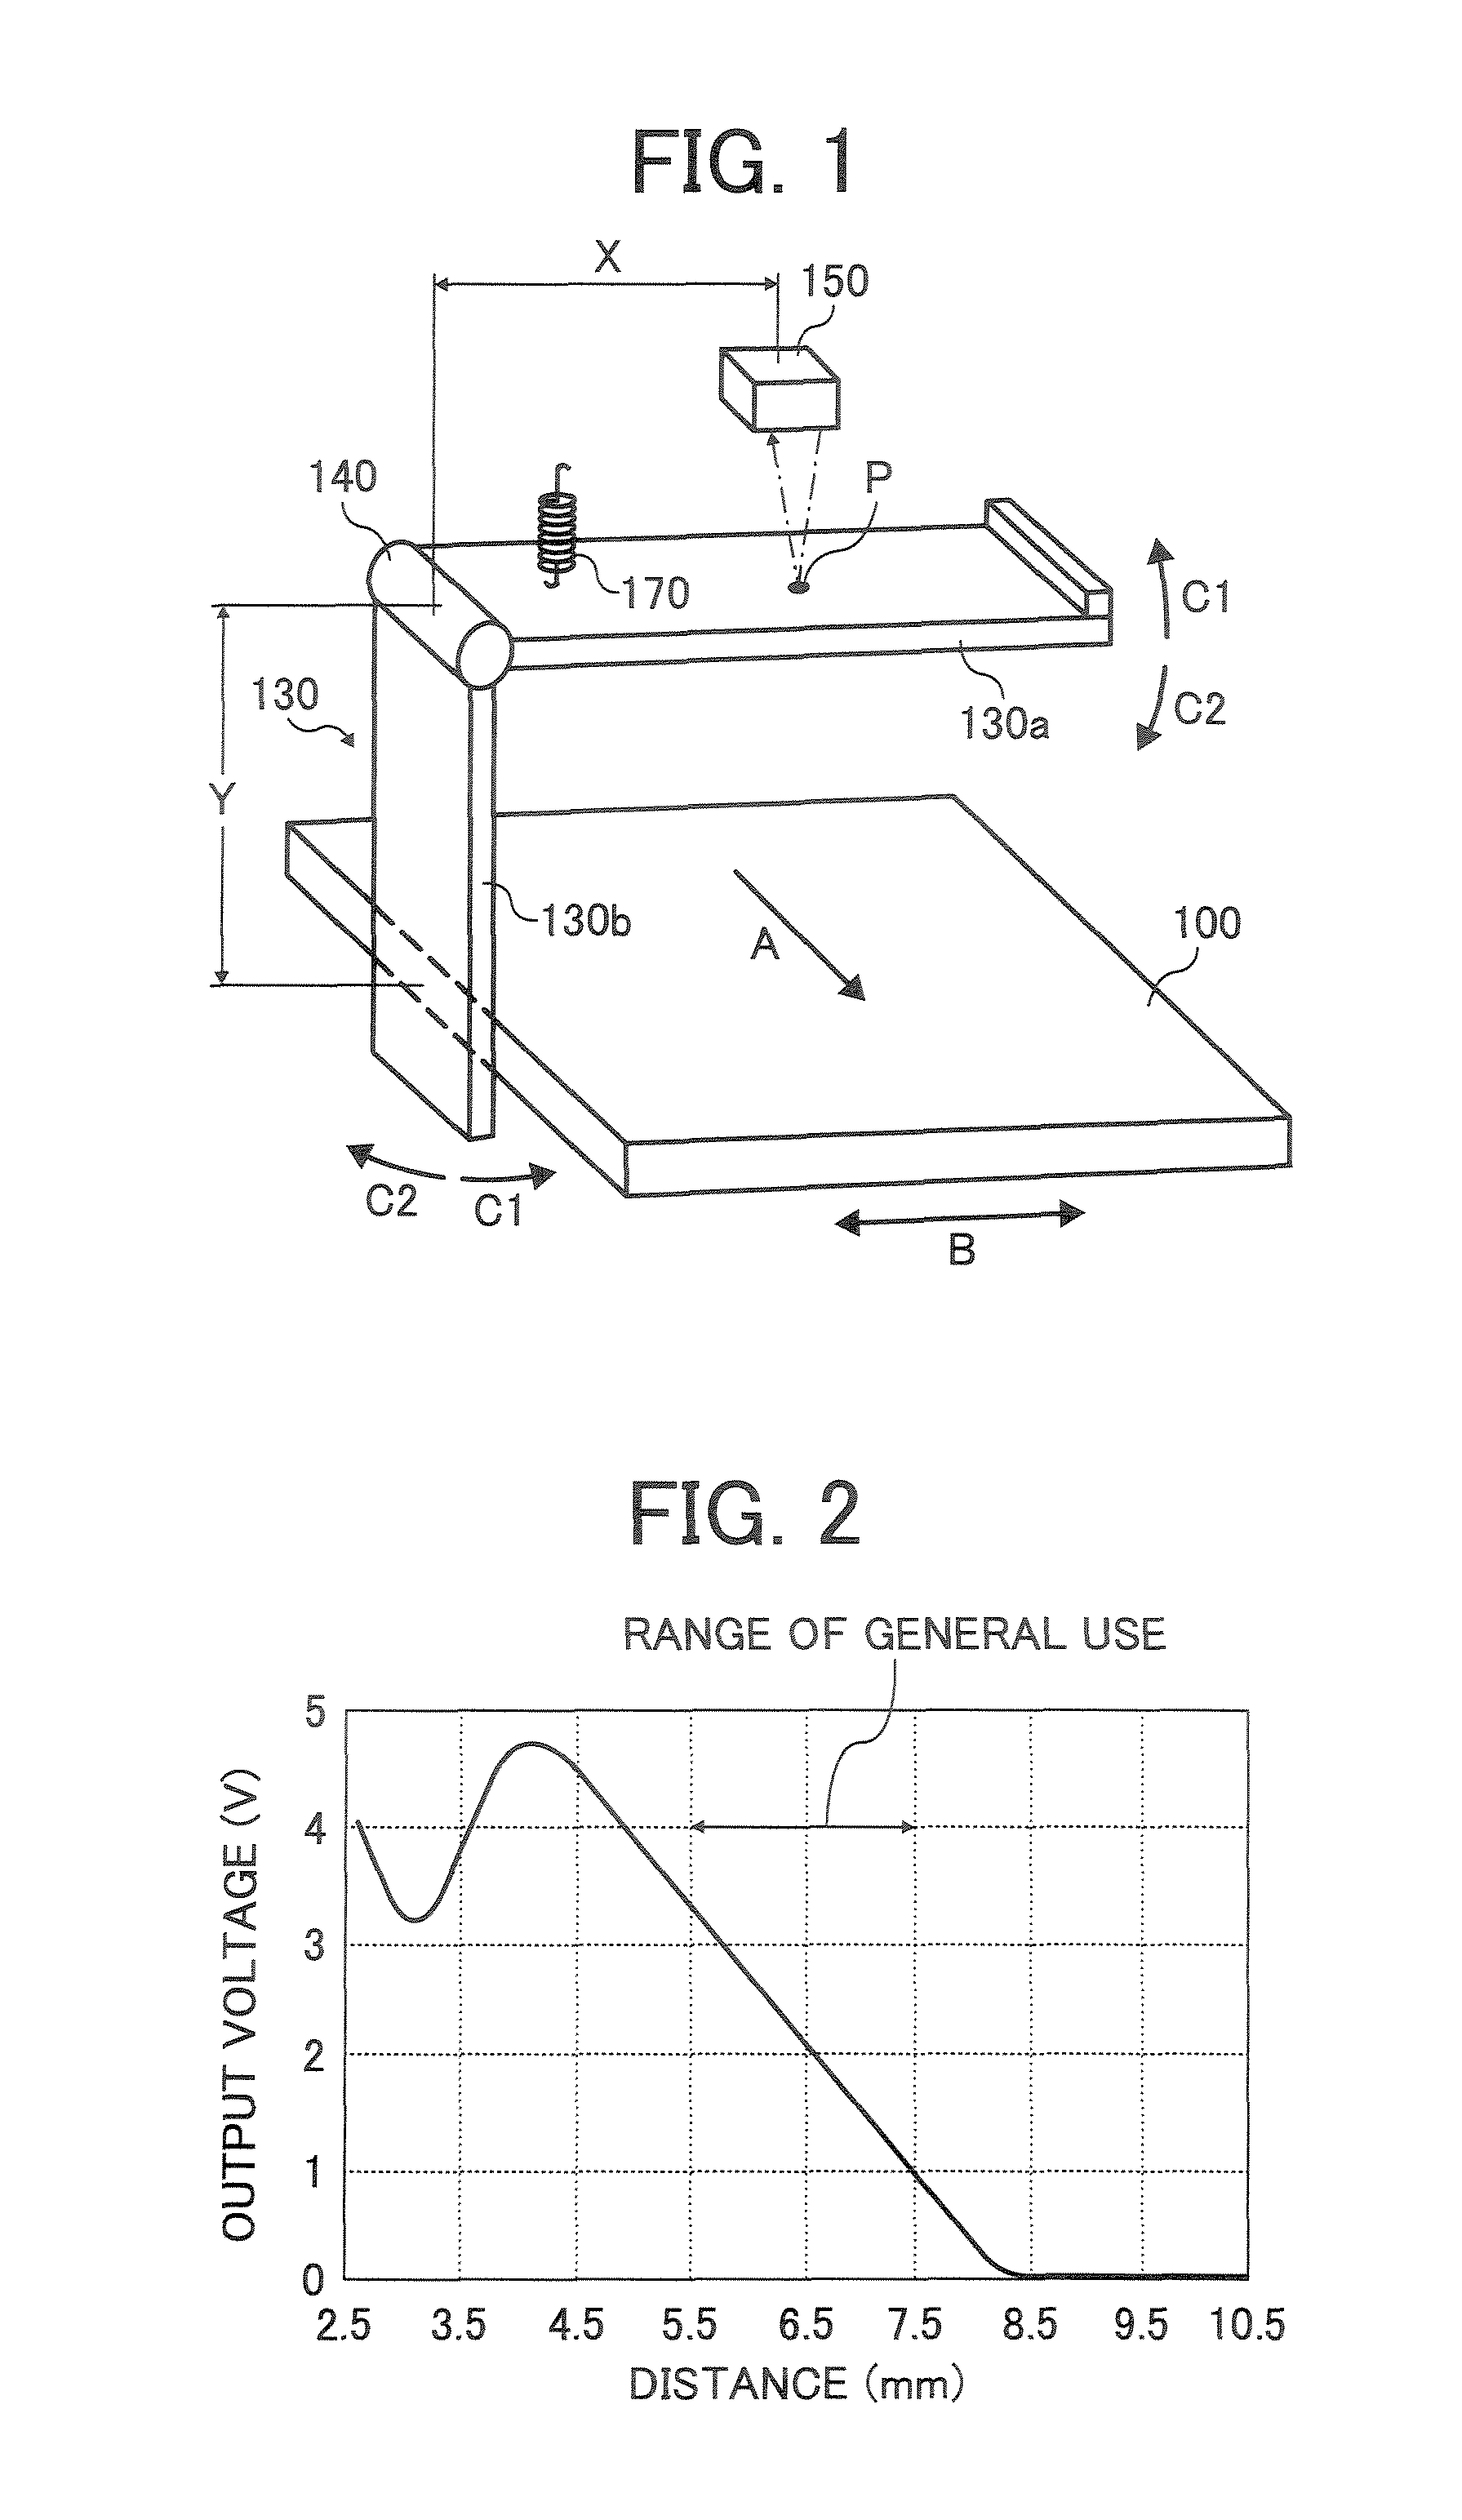 Image forming apparatus including belt traveling unit which detects drifting of belt position